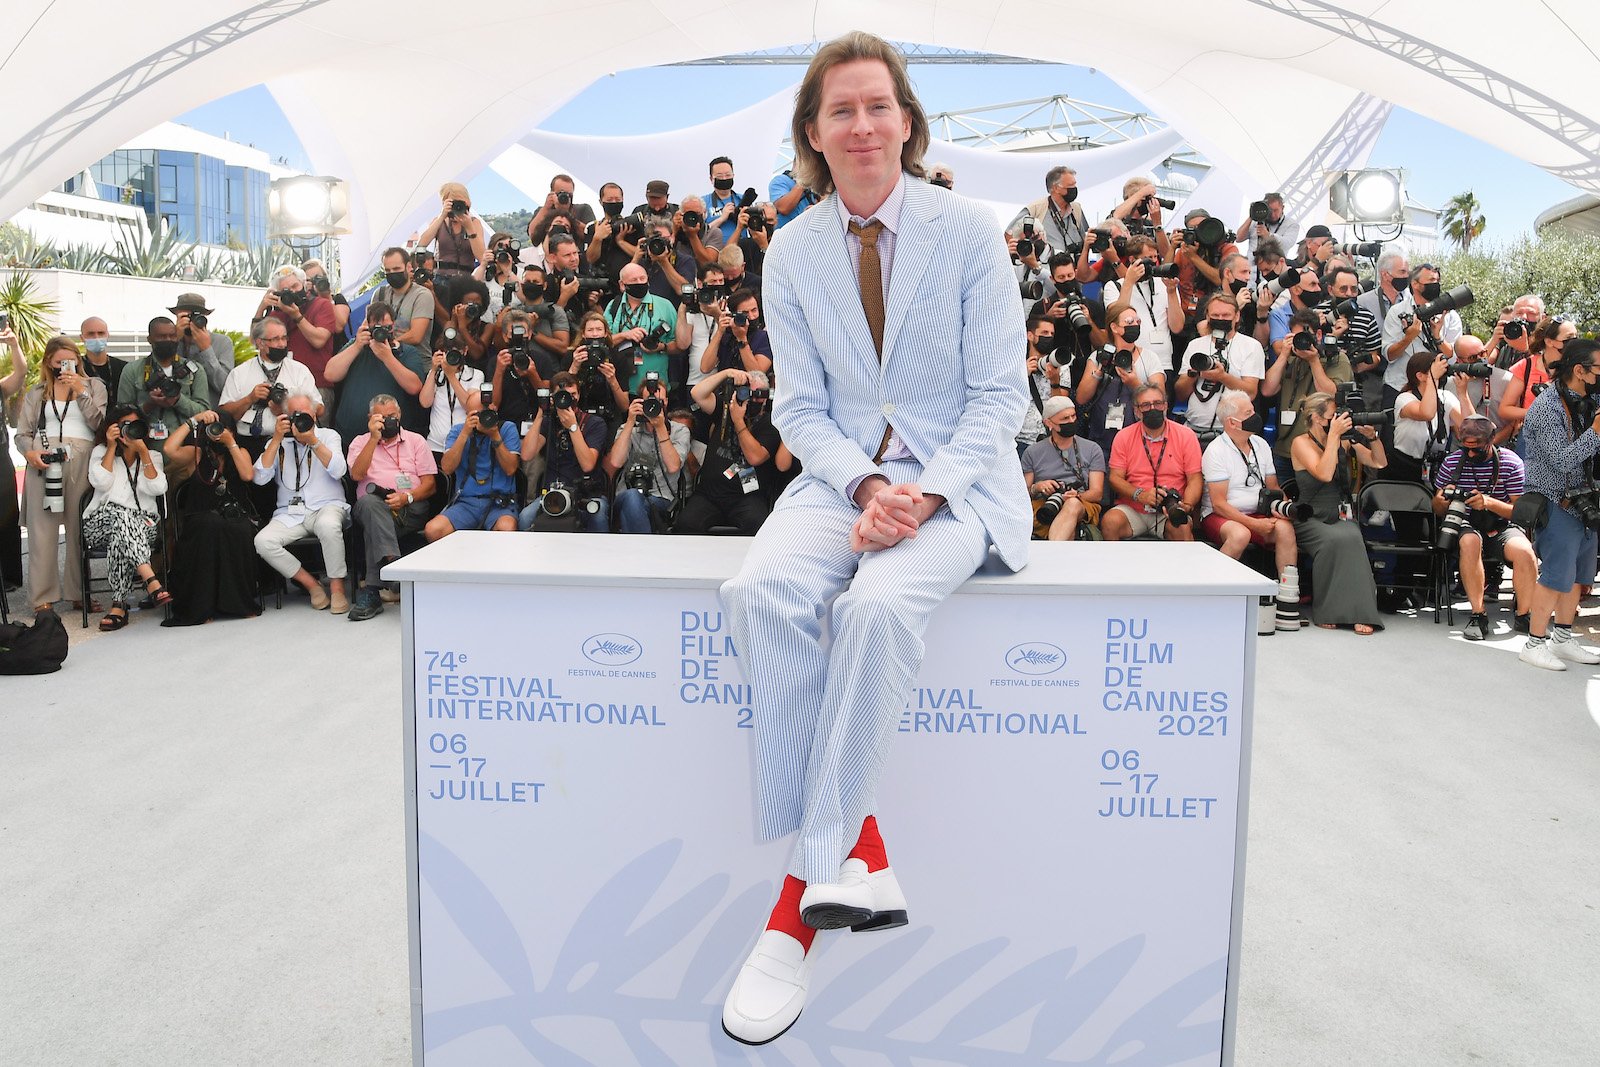 Wes Anderson at a film festival 